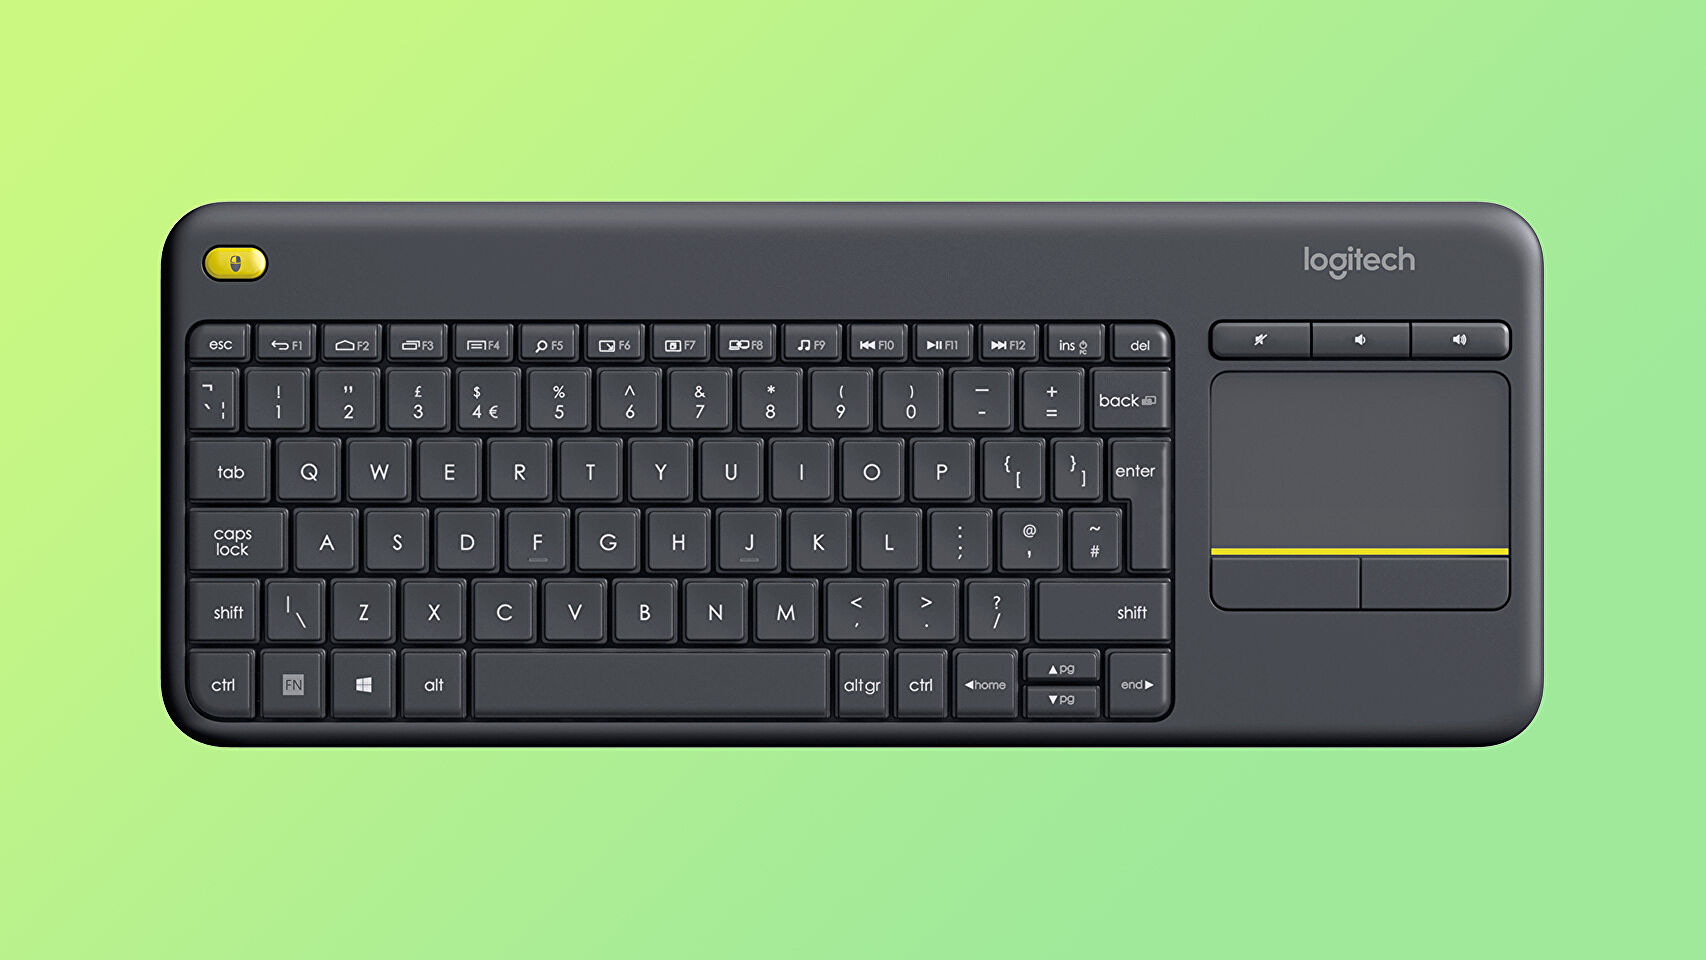 This compact wireless keyboard is the perfect Steam Deck or media center PC companion